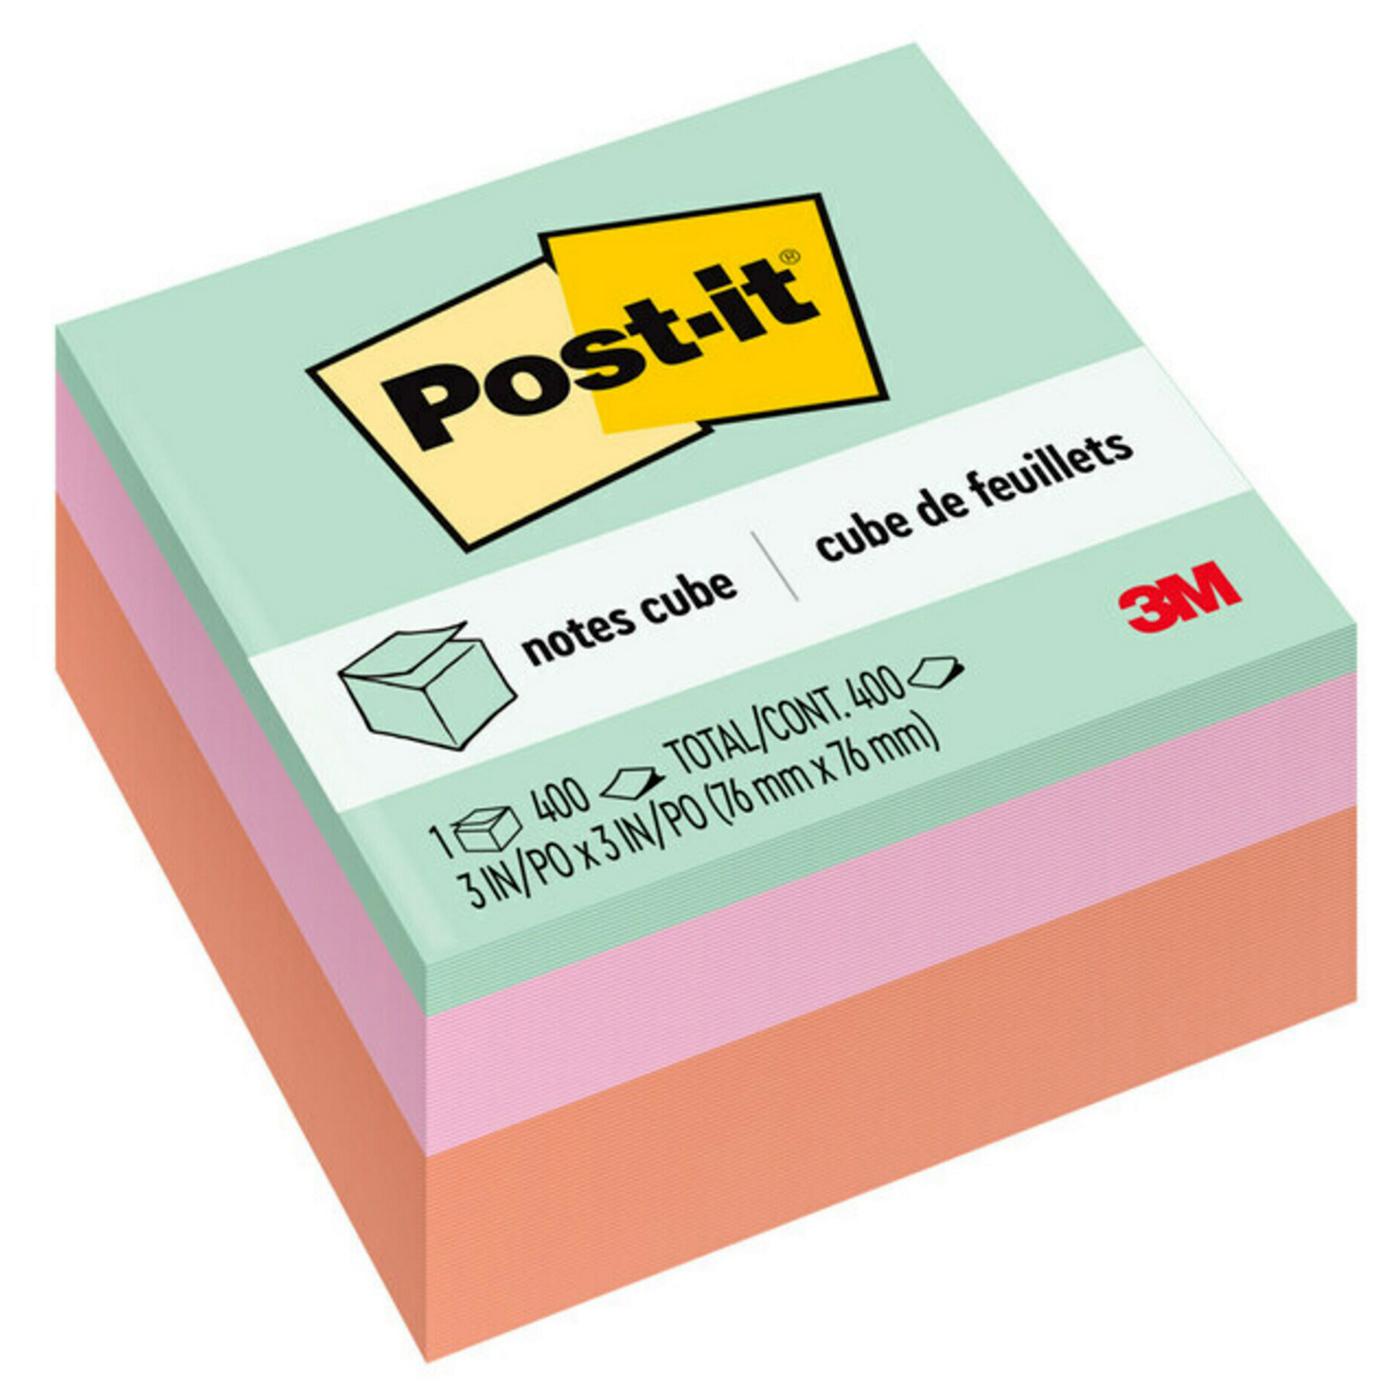 Post-it 400 Super Sticky Notes Cube - Pastel Colors; image 1 of 2